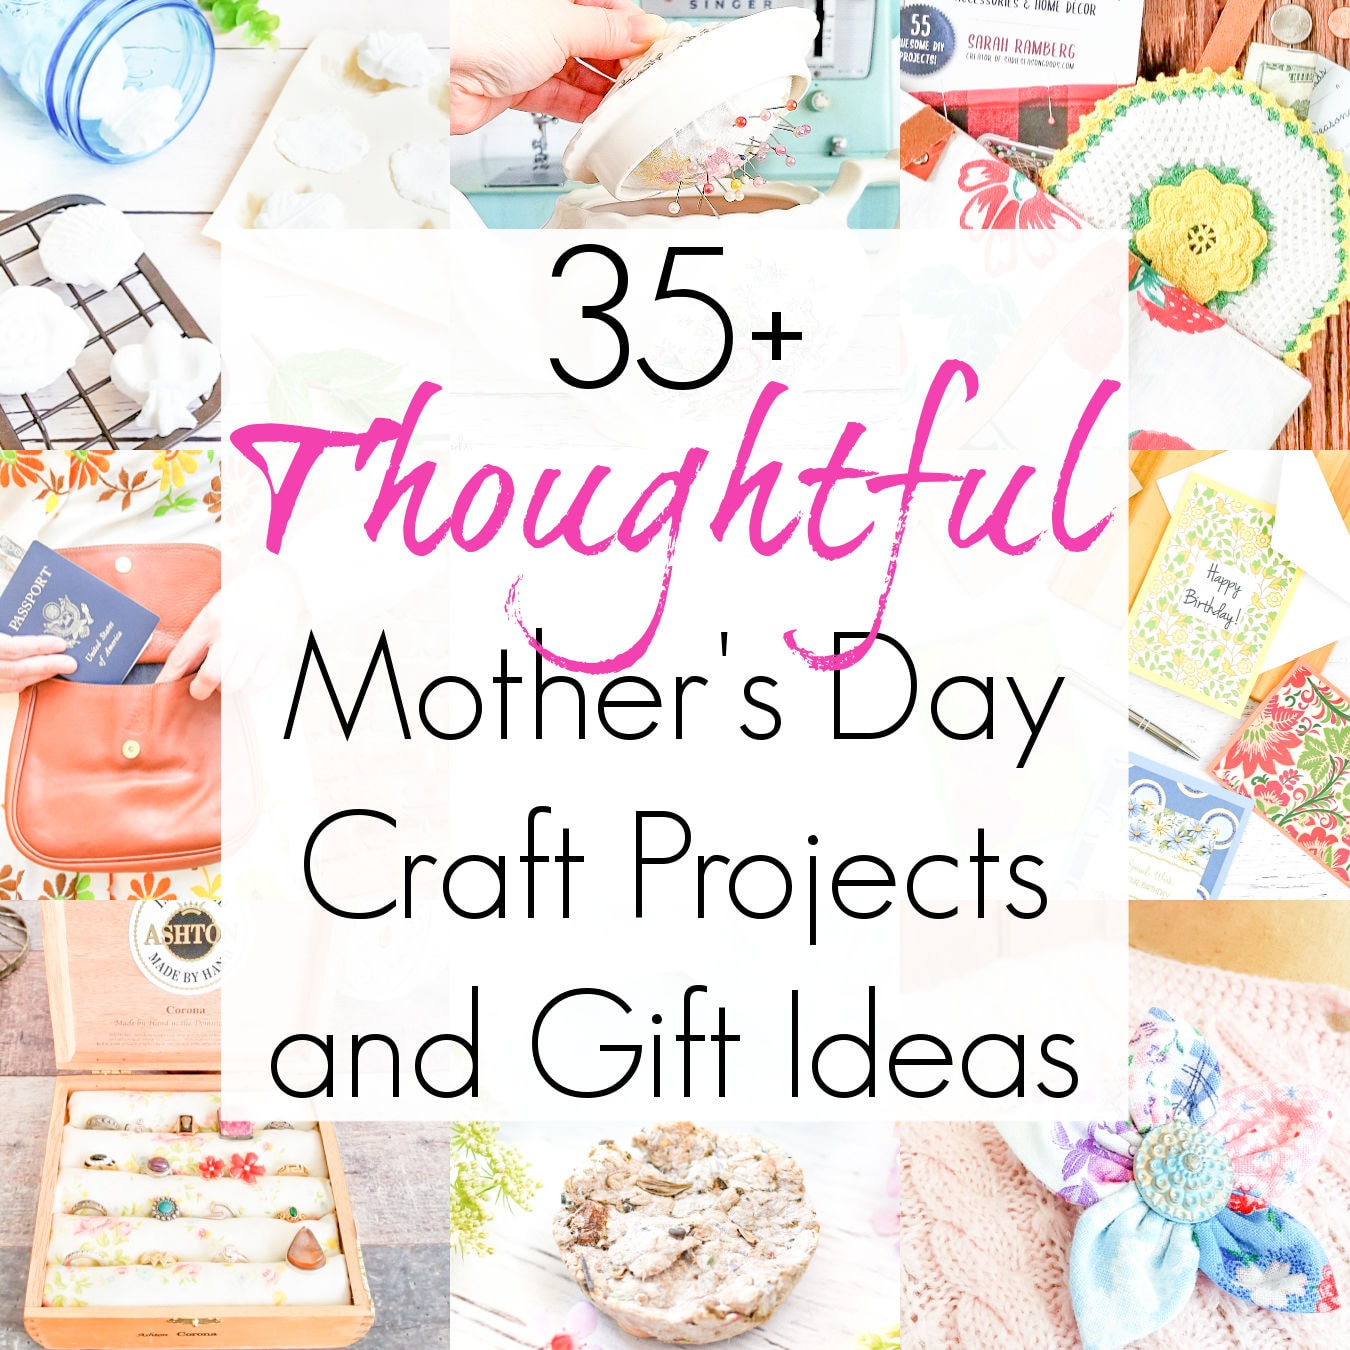 35+ Mother’s Day Craft Ideas